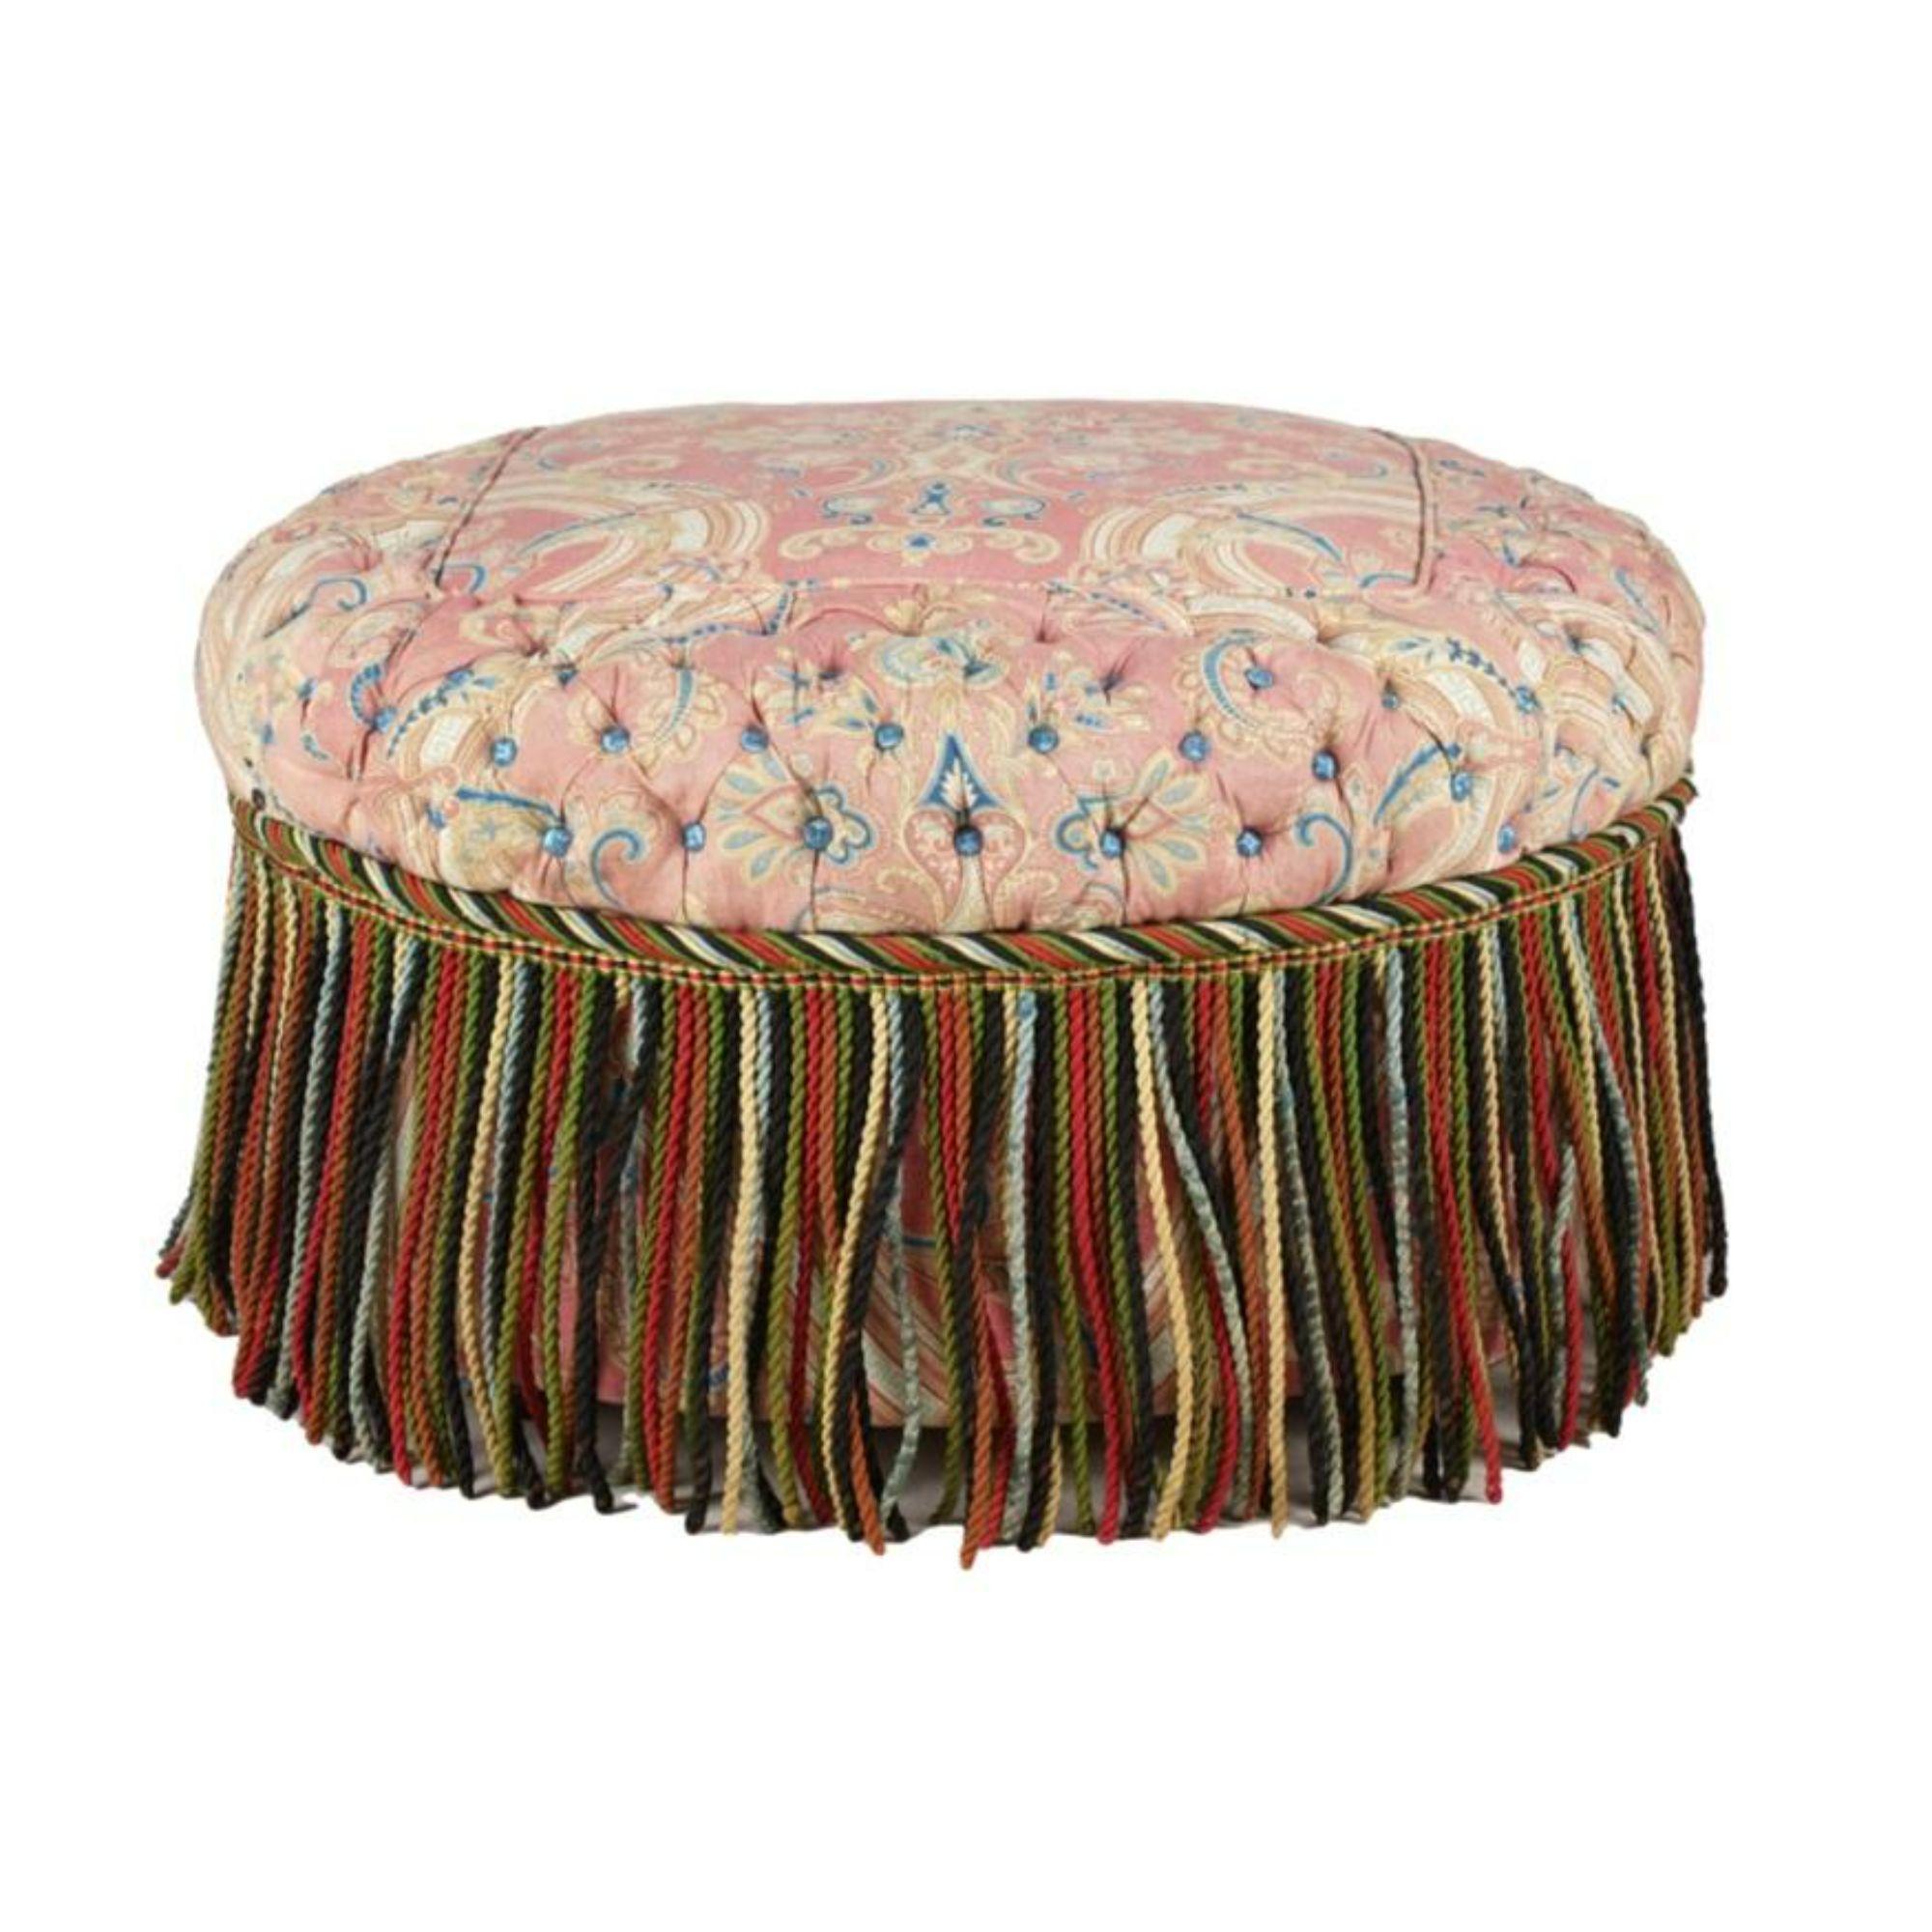 Hollywood Regency Pink Paisley Tufted Upholstered Round Ottoman. It features colorful long rope trim with tufted edges in Pink Paisley designer fabric

Additional information: 
Materials: CottonLinenWood
Color: Pink
Period: 1990s
Styles: Hollywood